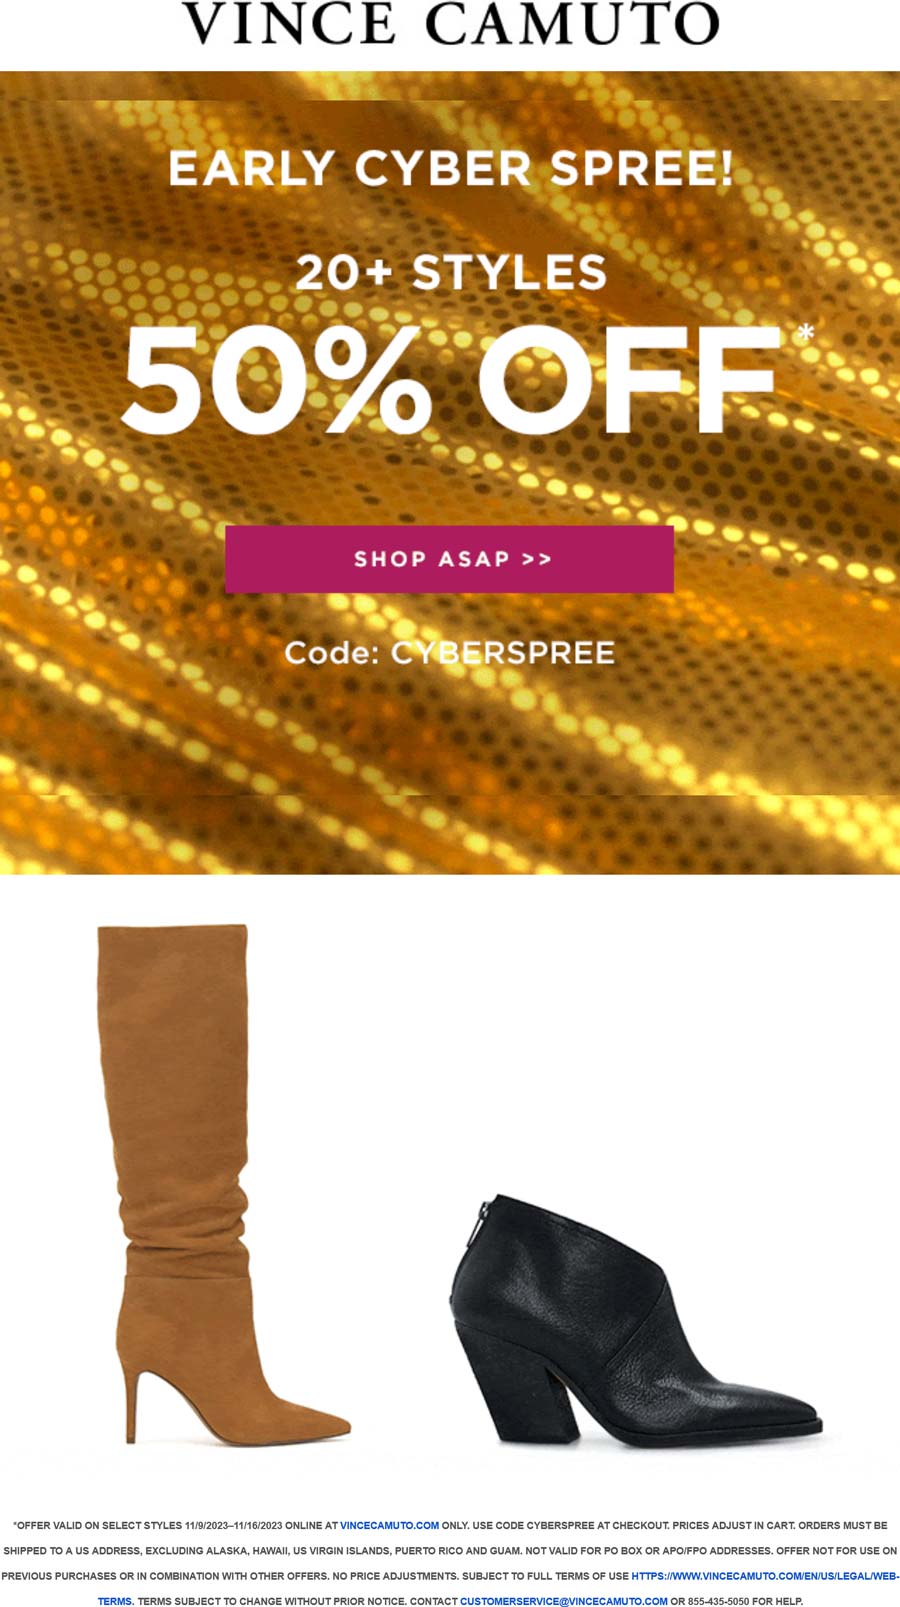 50% off various styles online at Vince Camuto via promo code CYBERSPREE #vincecamuto